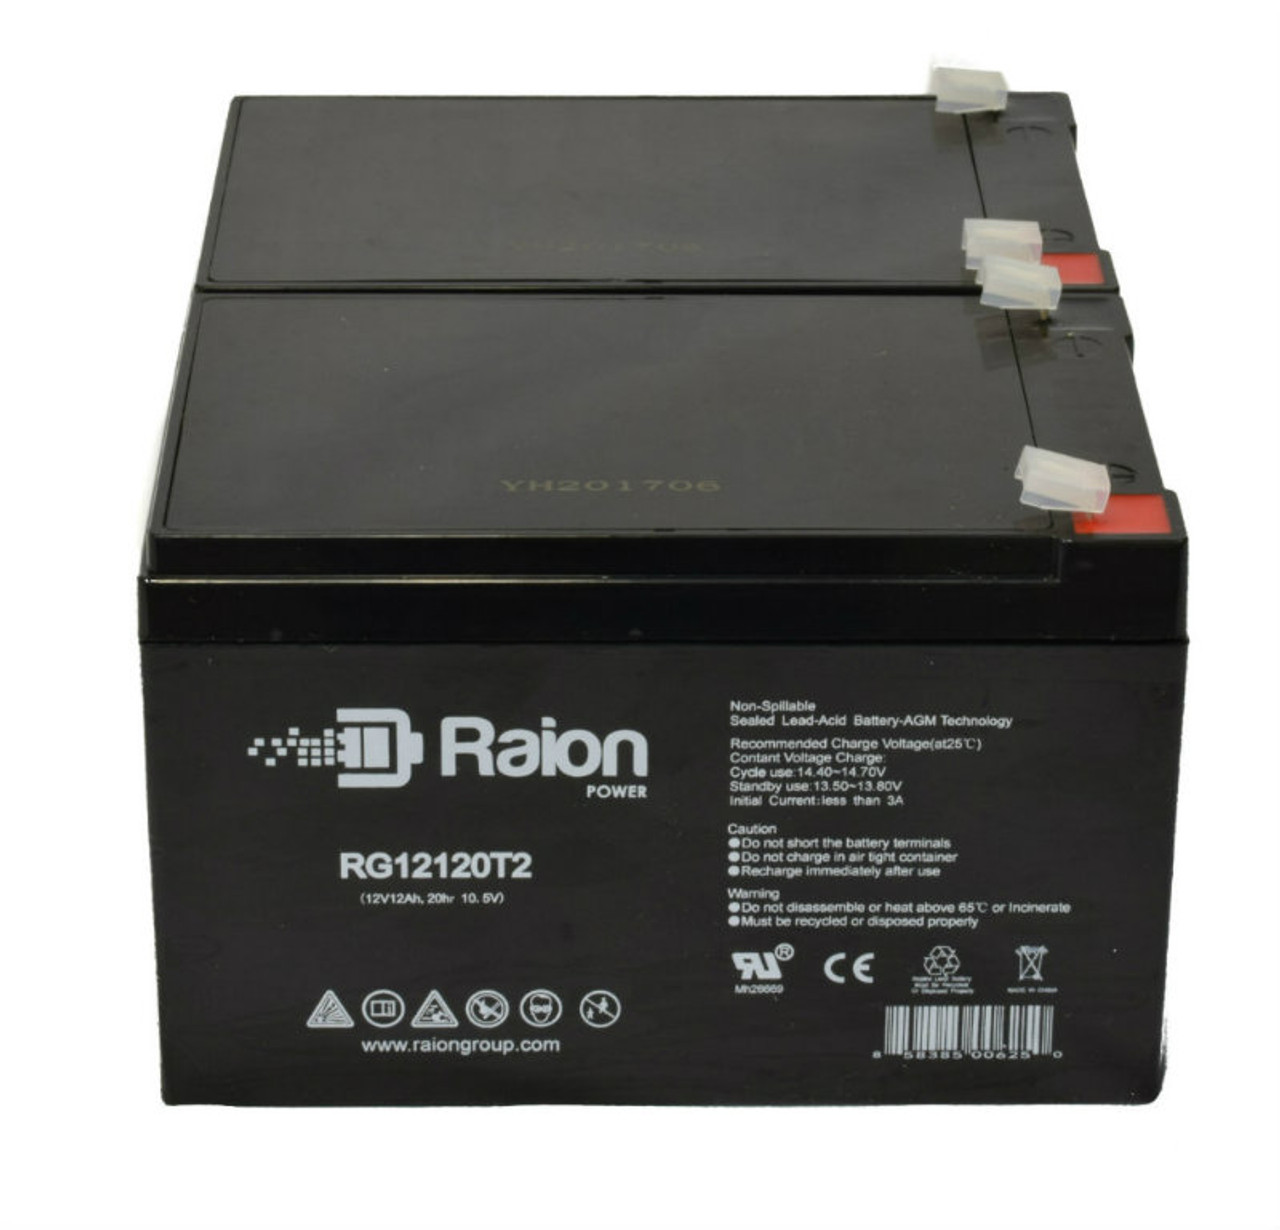 Raion Power 12V 12Ah Non-Spillable Compatible Replacement Battery for Nair NR12-12L - (2 Pack)